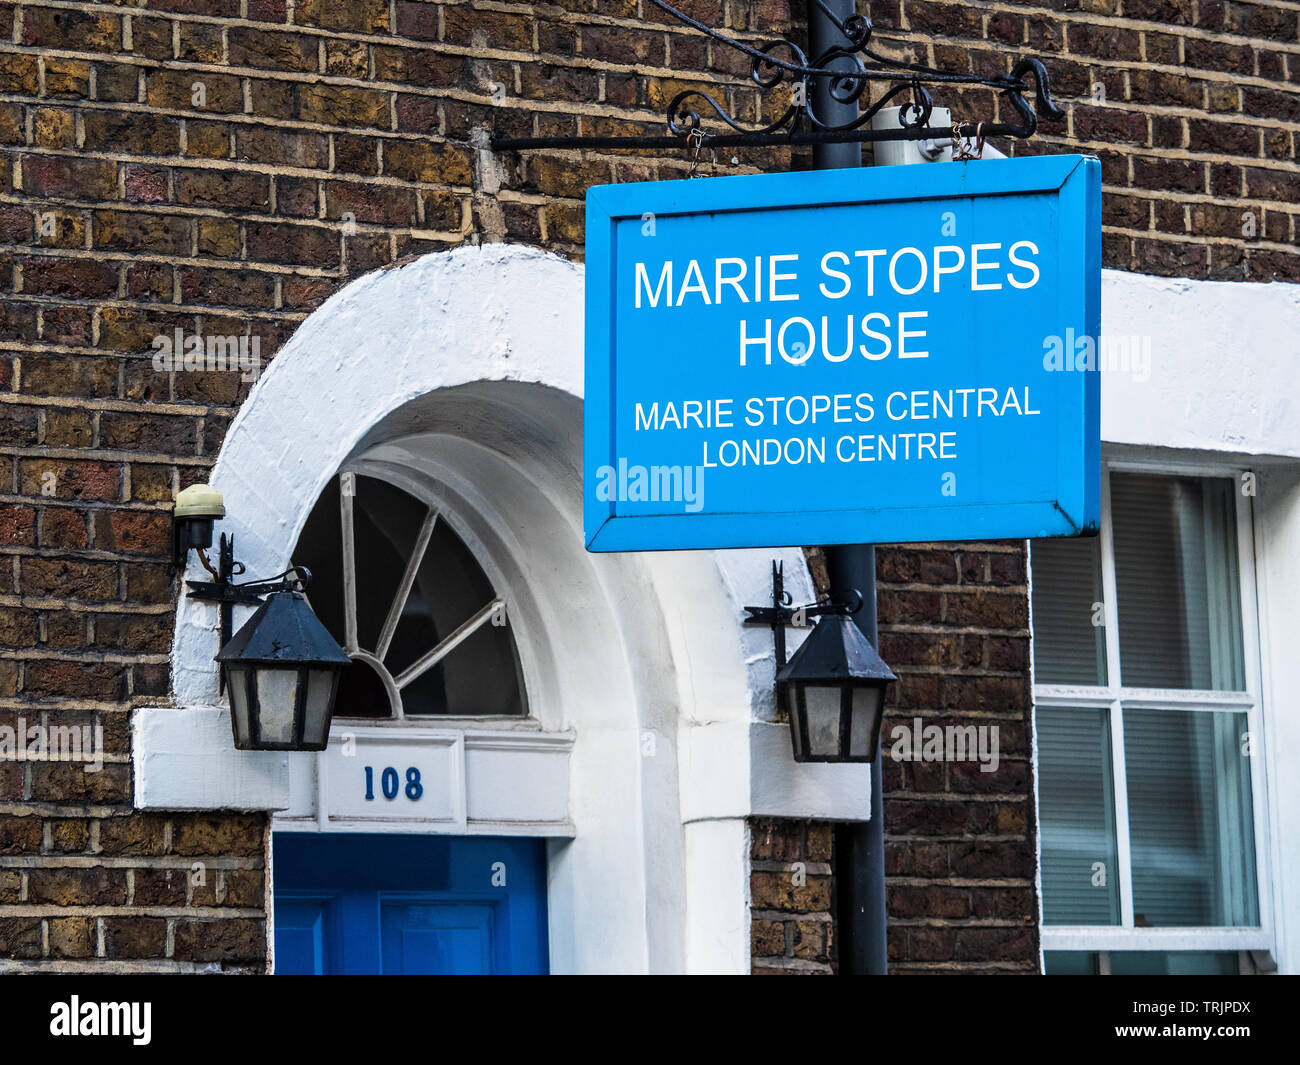 Marie Stopes House - Birth Control Clinic in Whitfield Street Central London UK - Marie Stopes was a pioneer in Birth Control. Stock Photo